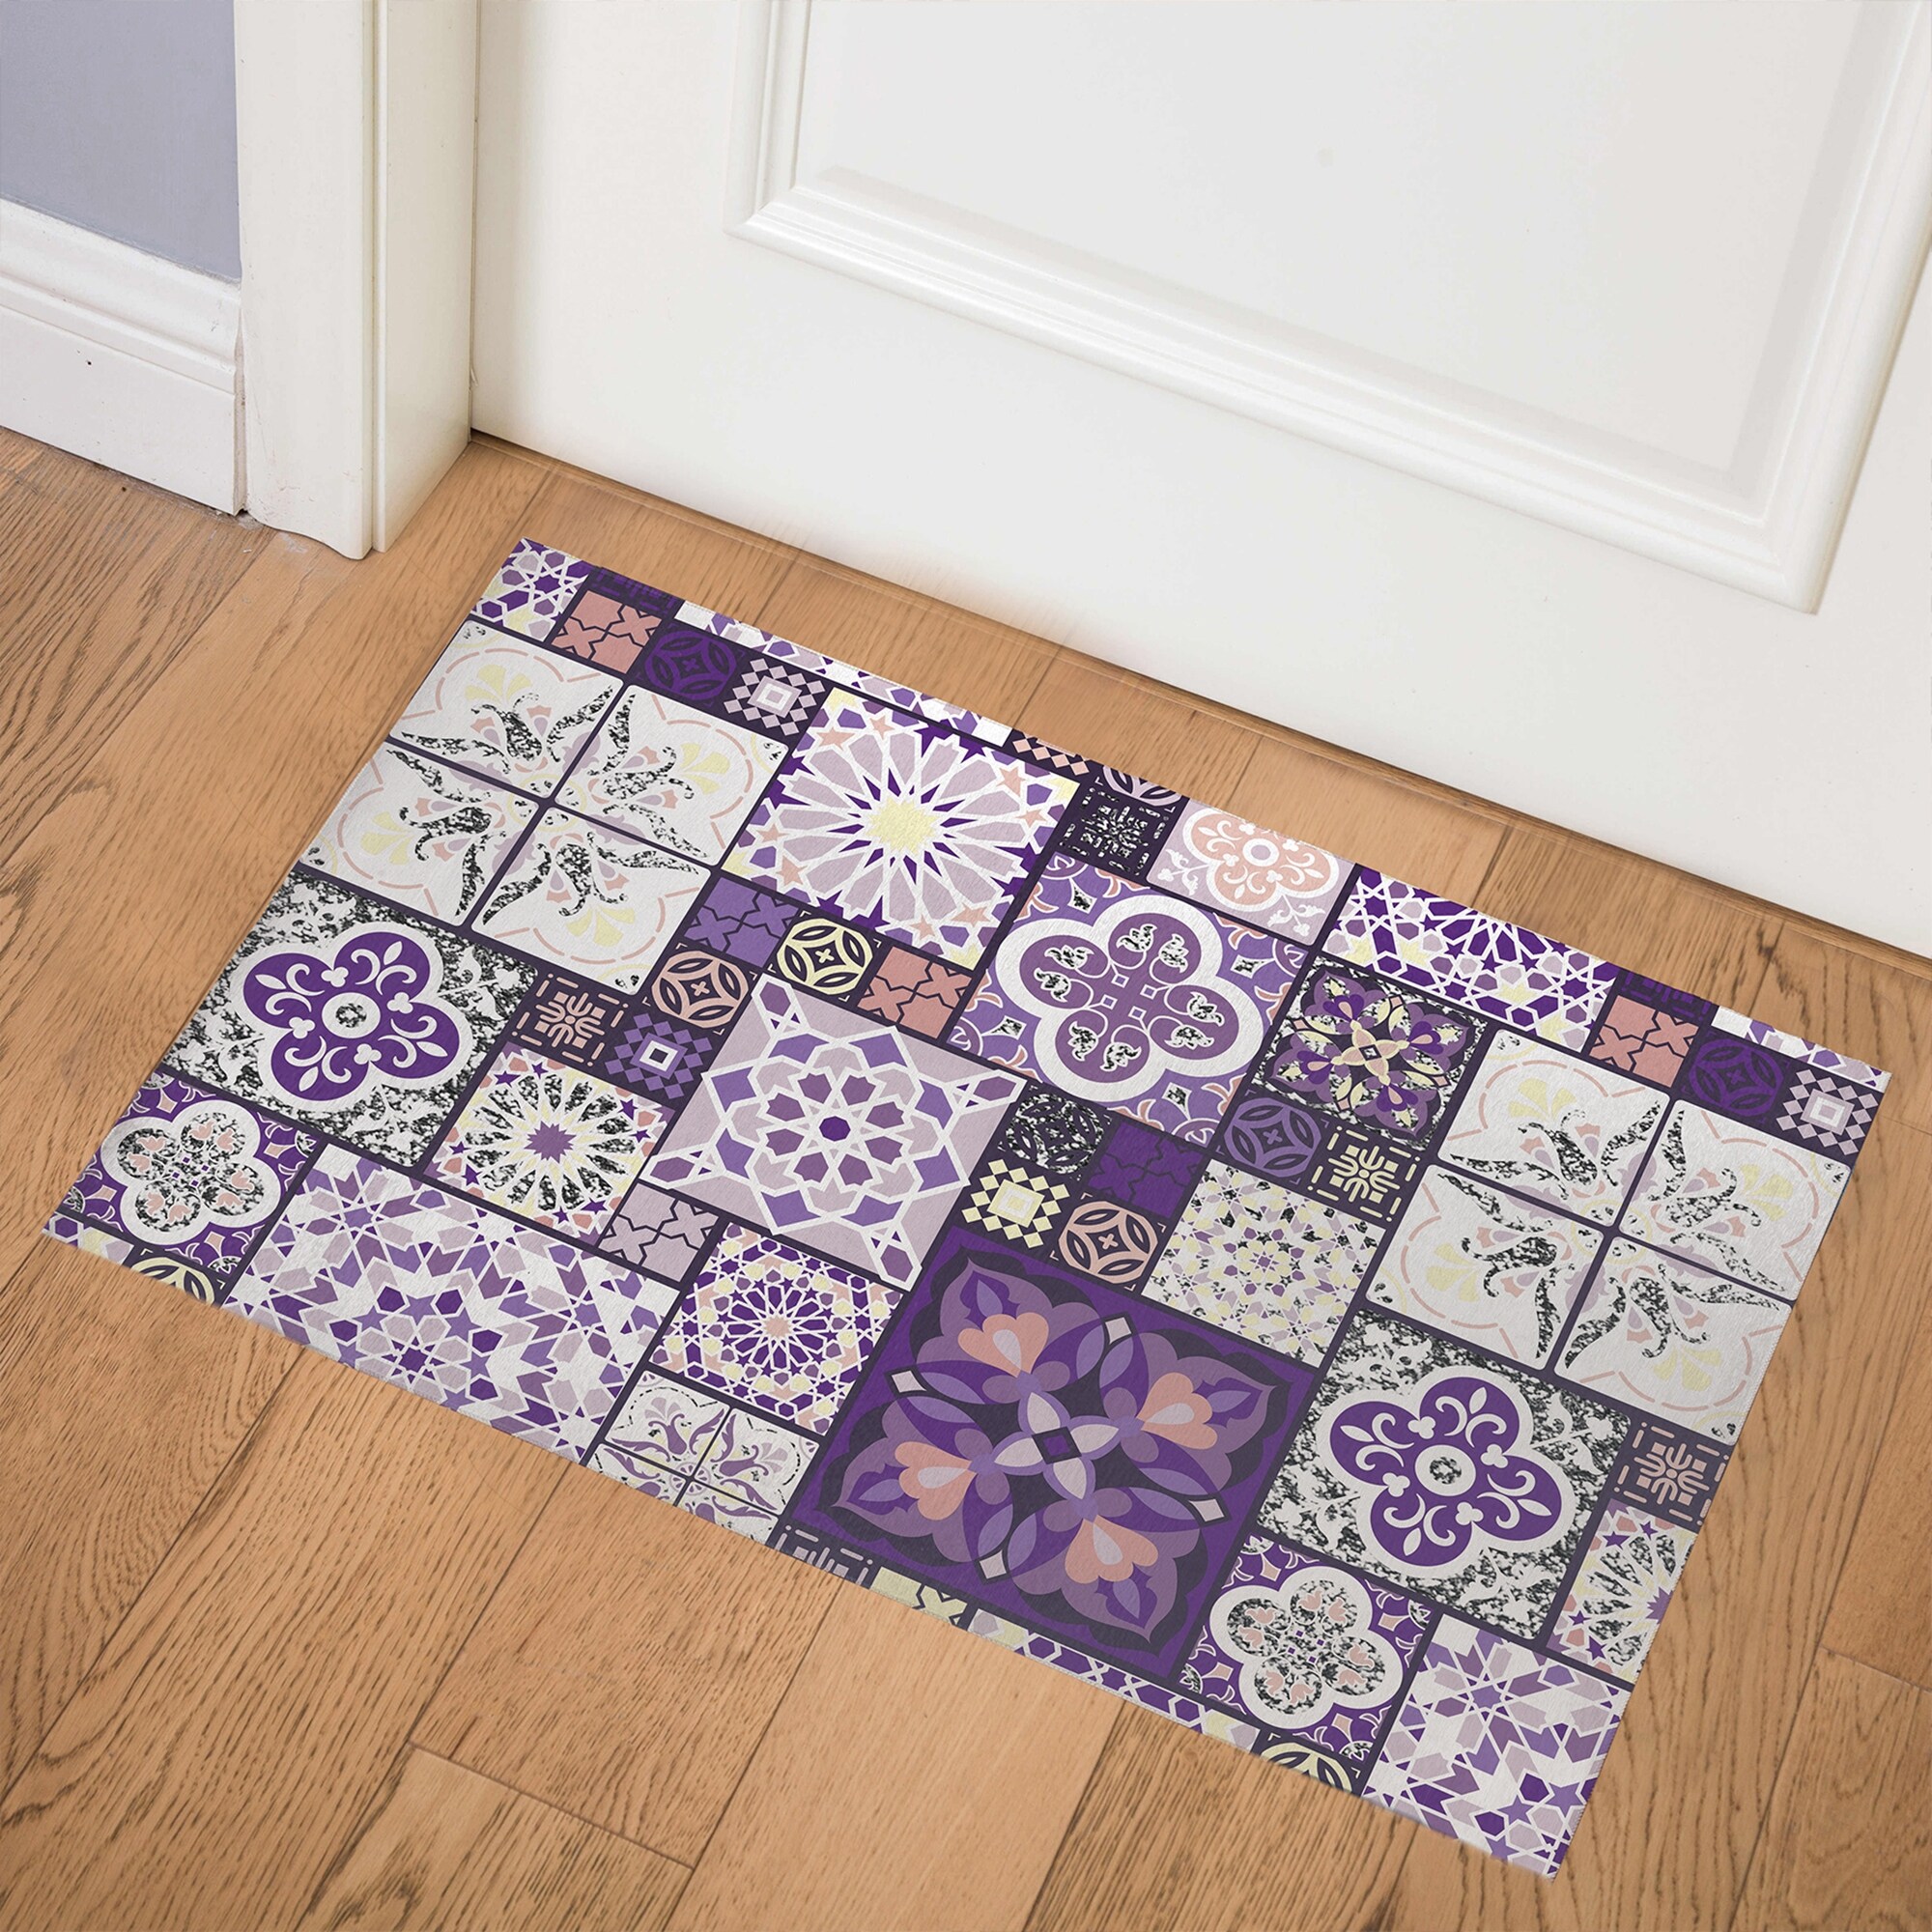 https://ak1.ostkcdn.com/images/products/is/images/direct/7fd8b5744047252f03730d55e647bffed5bf9055/MOROCCAN-TILE-Indoor-Floor-Mat-By-Pip-%26-Lulu.jpg